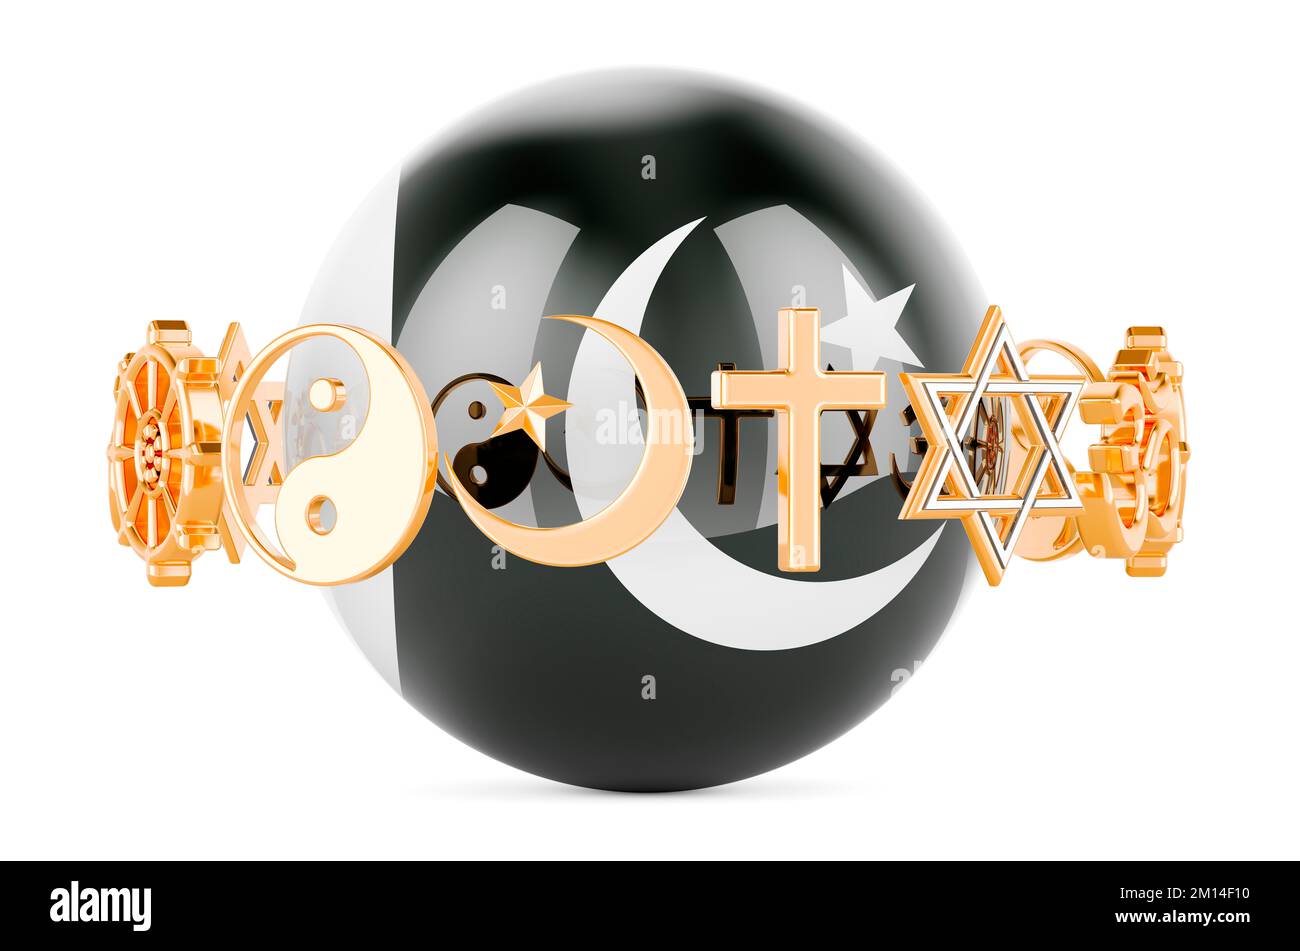 Pakistani flag painted on sphere with religions symbols around, 3D rendering isolated on white background Stock Photo